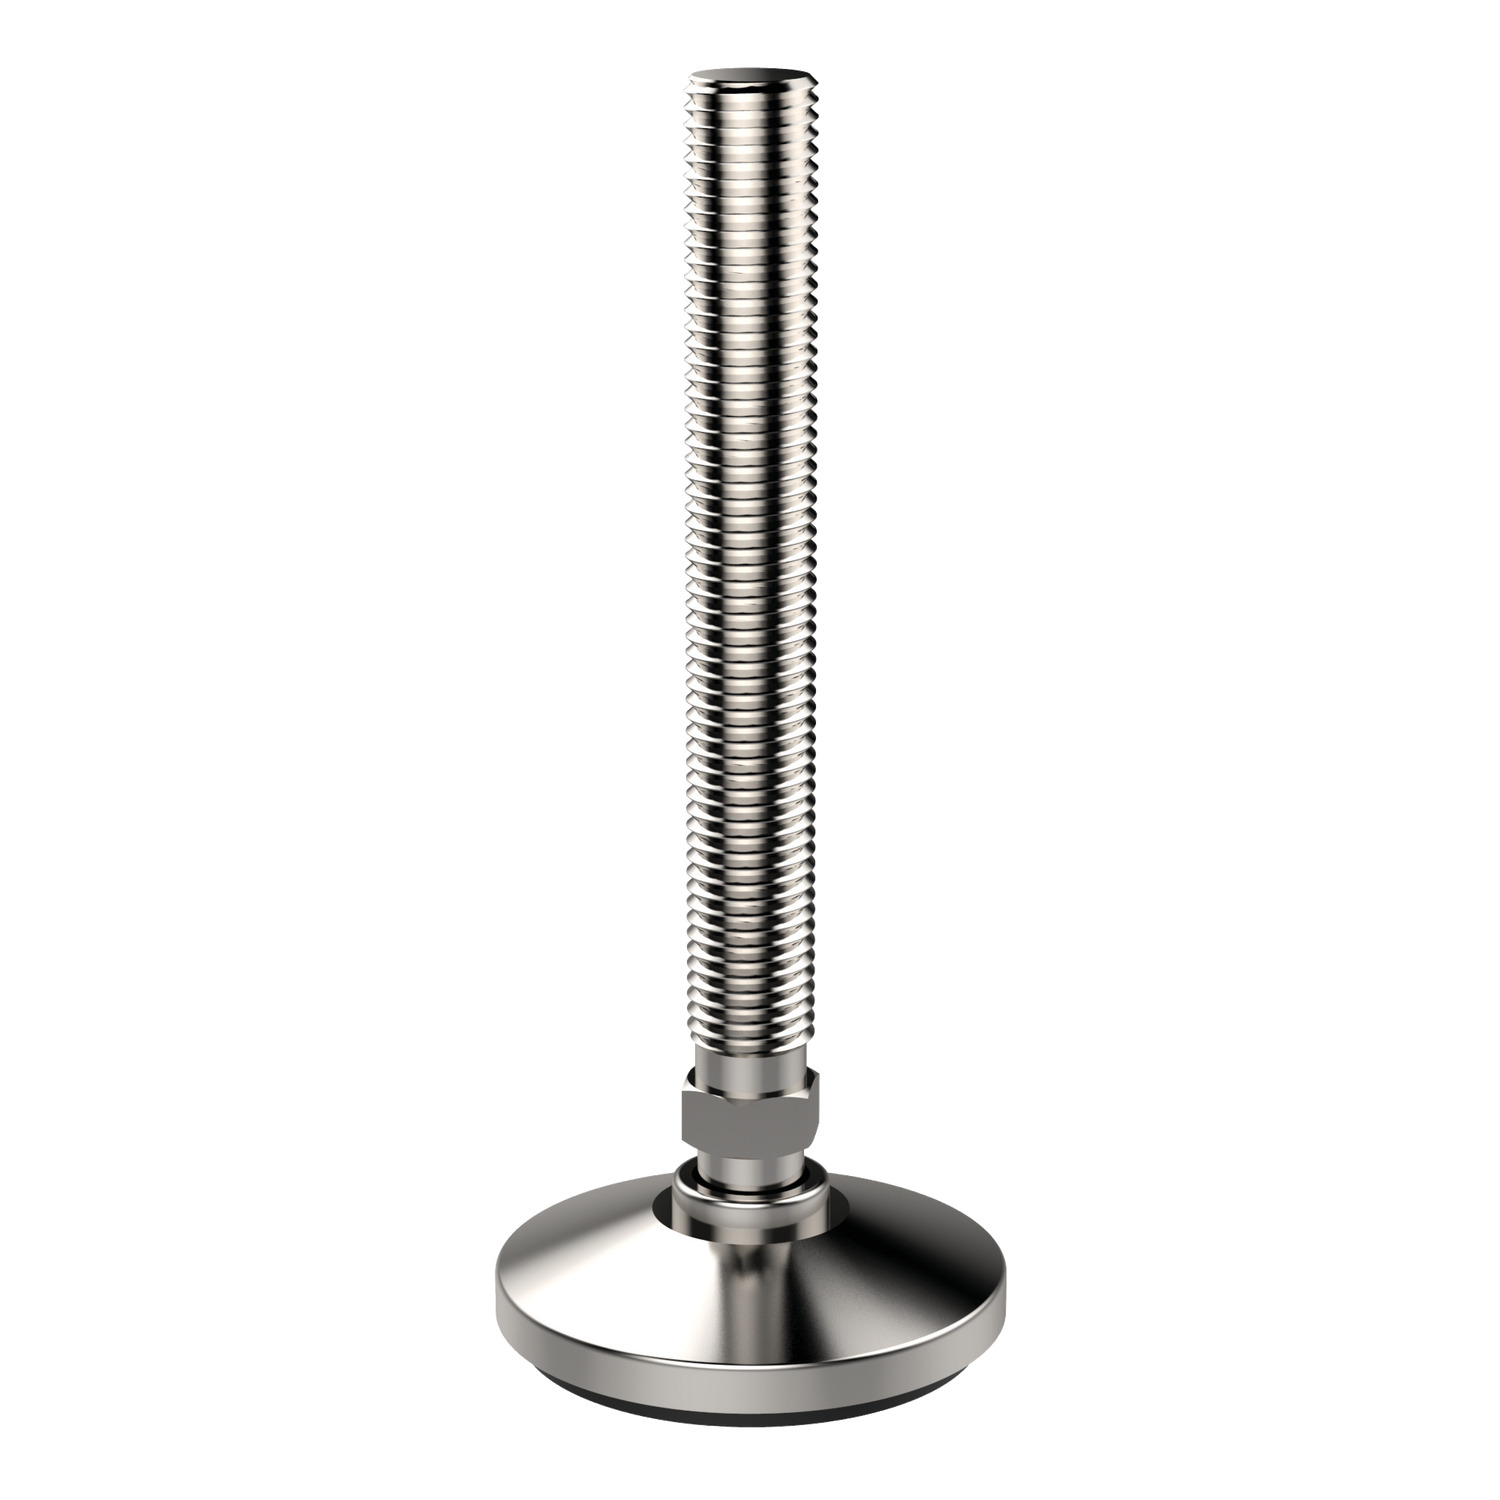 34711.W0240 Levelling Feet Pad & bolt stainless steel - M24 - 125. Also known as W4100.AC0240